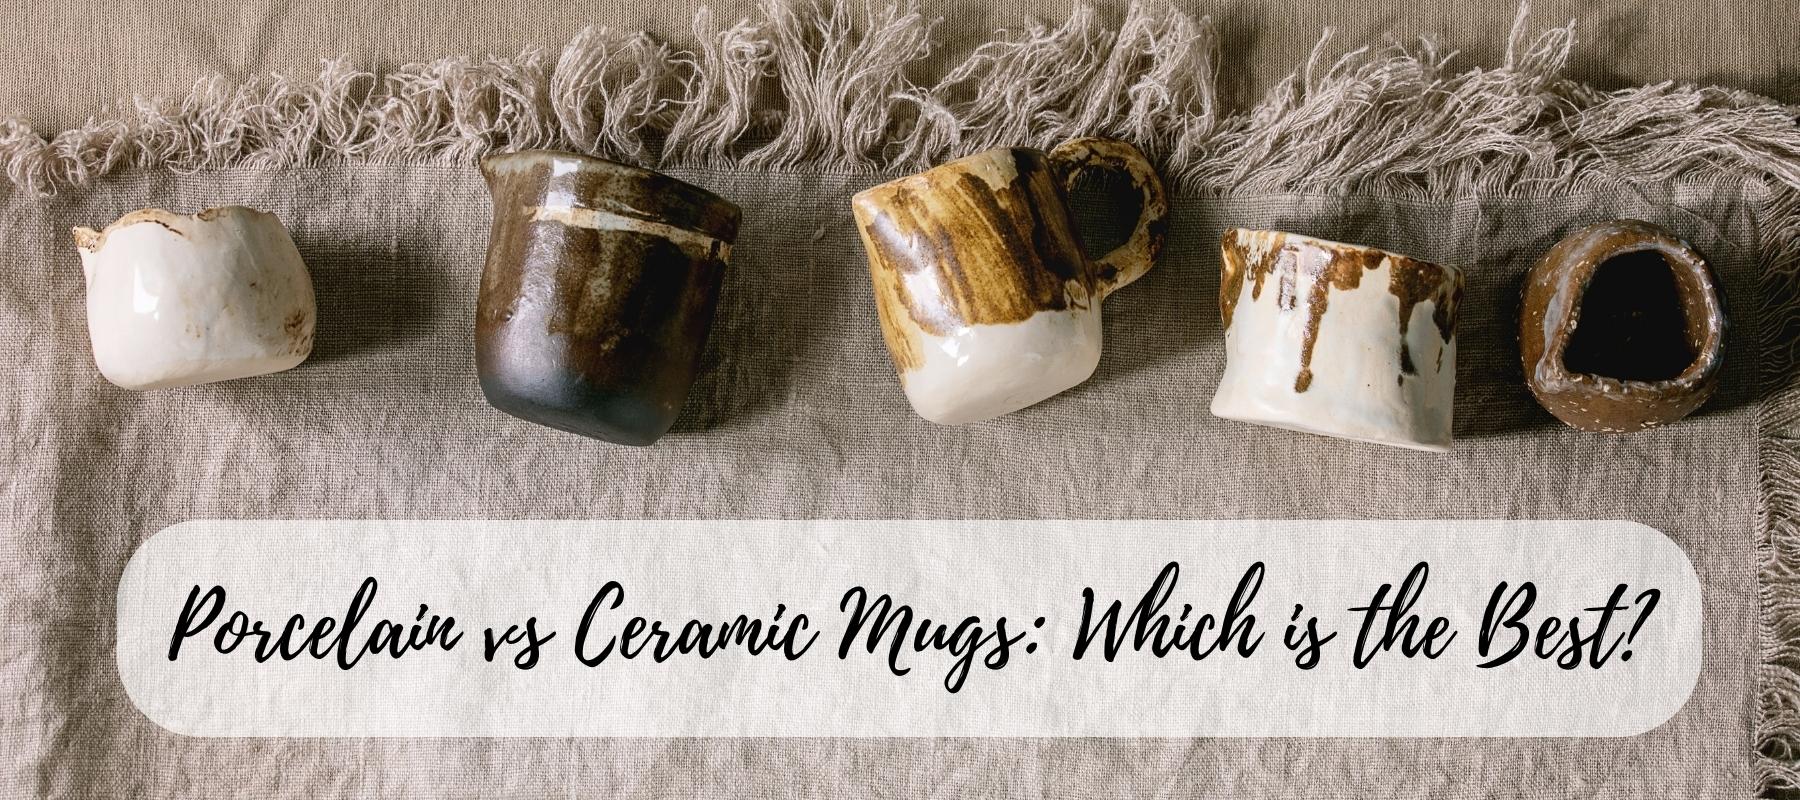 Porcelain vs Ceramic Mugs: Which is the Best?